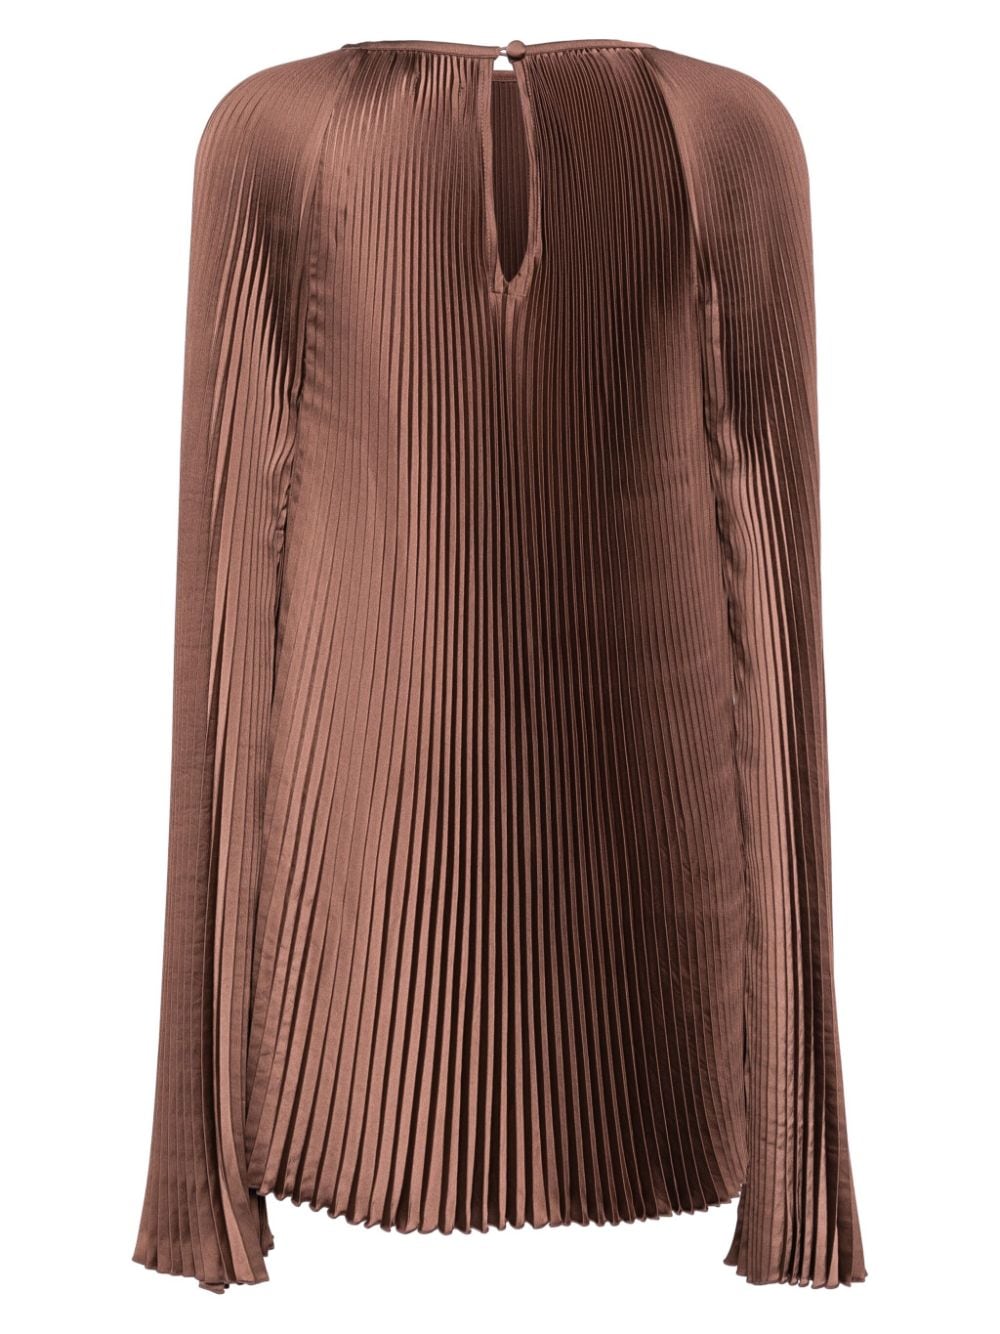 Image 2 of L'IDÉE fully pleated dress